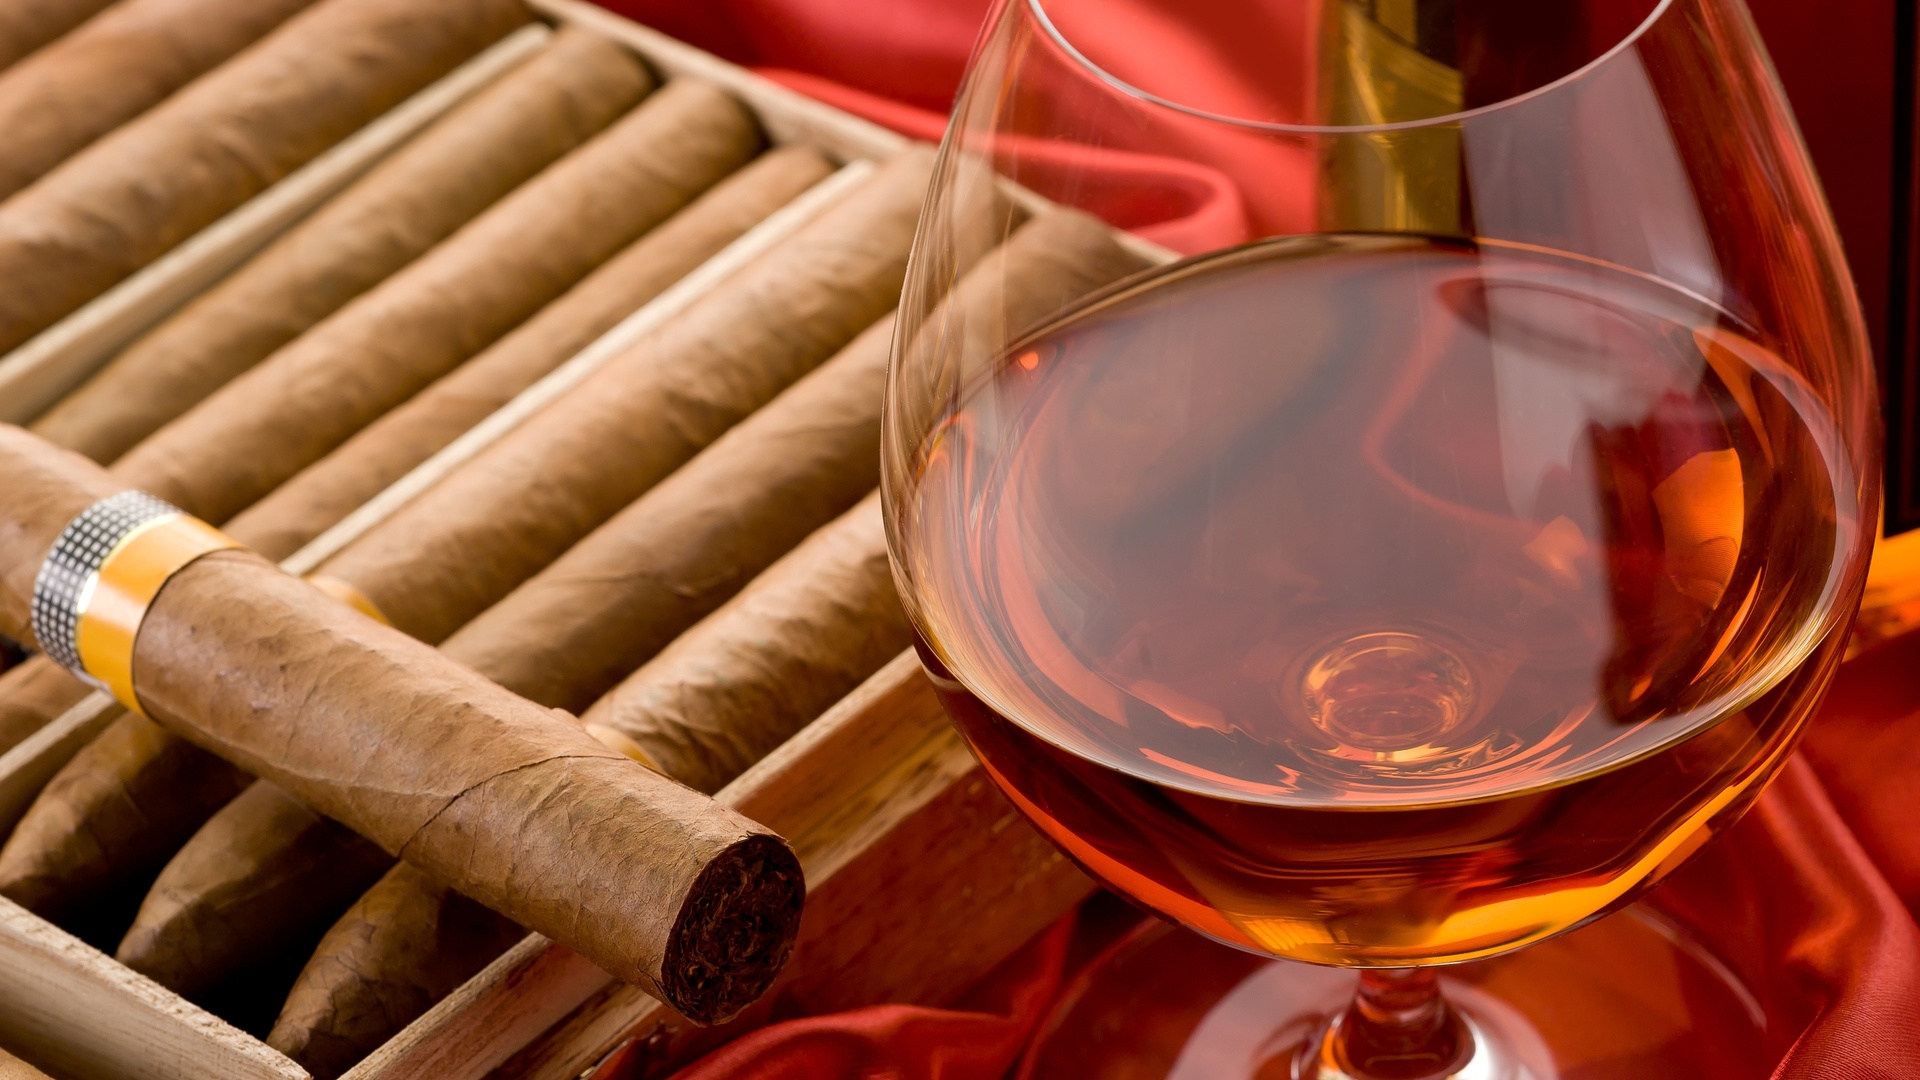 wallpaper pictures hd,drink,cigar,tobacco products,alcoholic beverage,wine